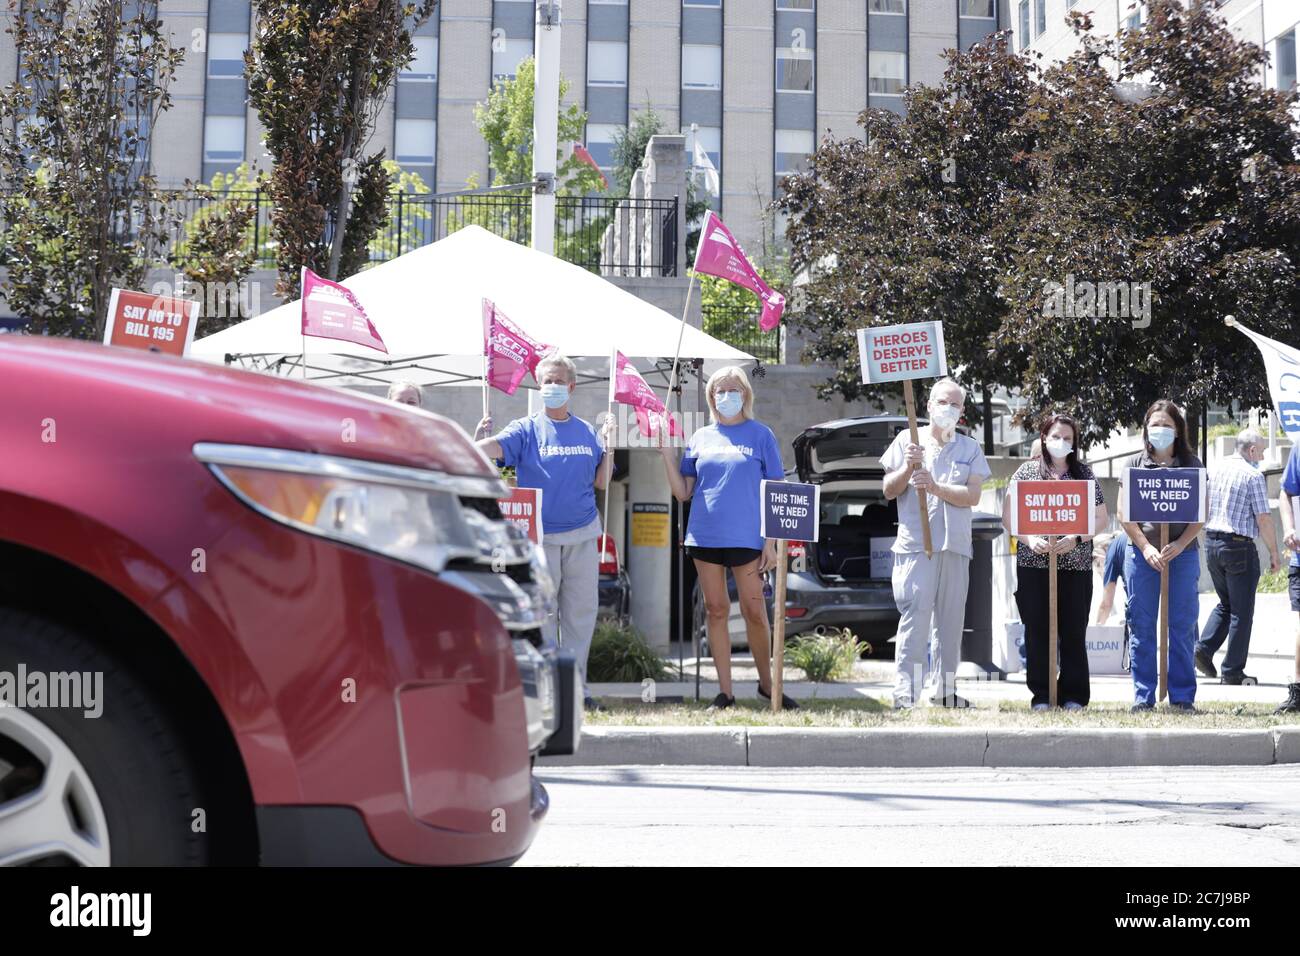 Angry Healthcare workers seen protesting at street side against Bill 195 amidst working in Covid-19 crisis Stock Photo